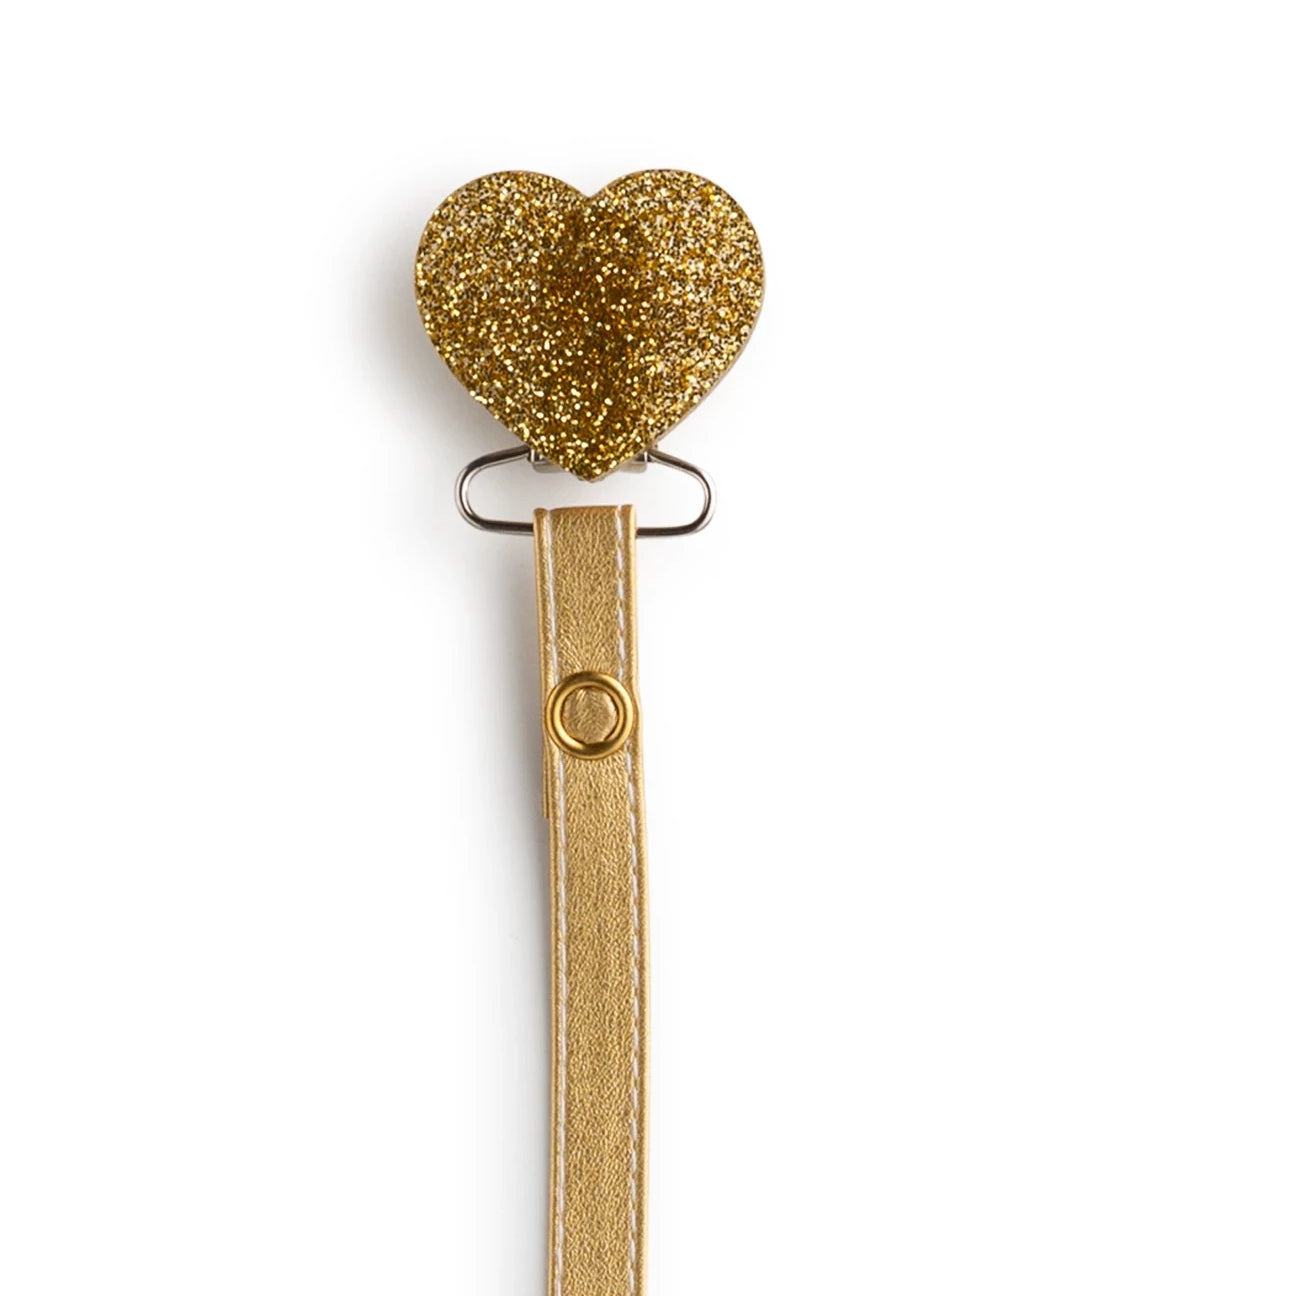 Classy Paci TWINKLE Gold Heart pacifier clip